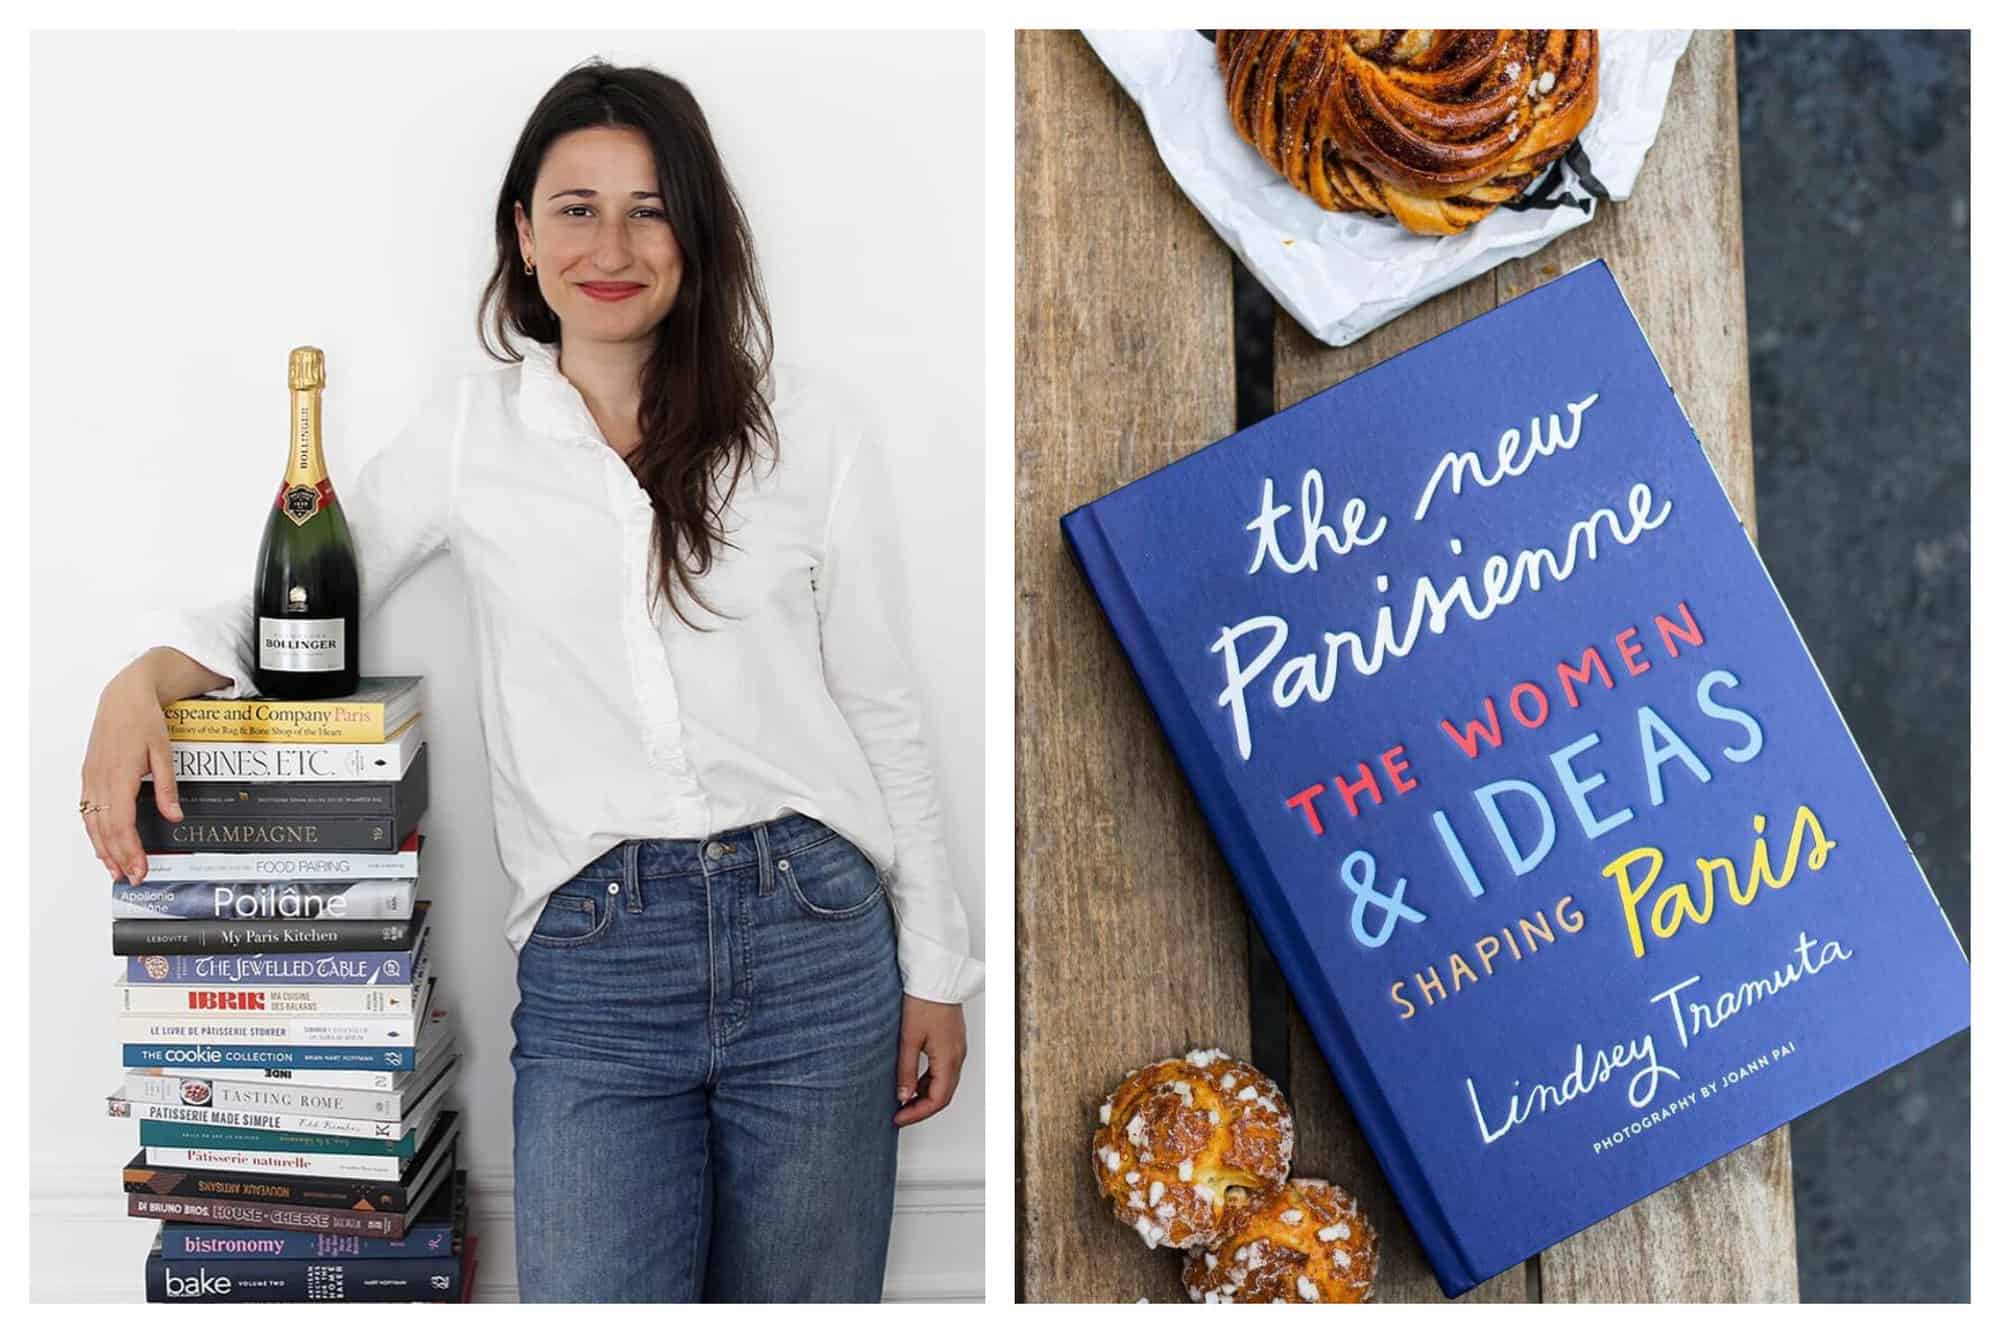 On the left is the author Lindsey Tramuta, smiling as she rests her right arm in a stack of books with a bottle of champagne on top. On the right is a blue book called "The New Parisienne: The women and Ideas shaping Paris" laying on a wooden table beside a couple of brown french pastries.